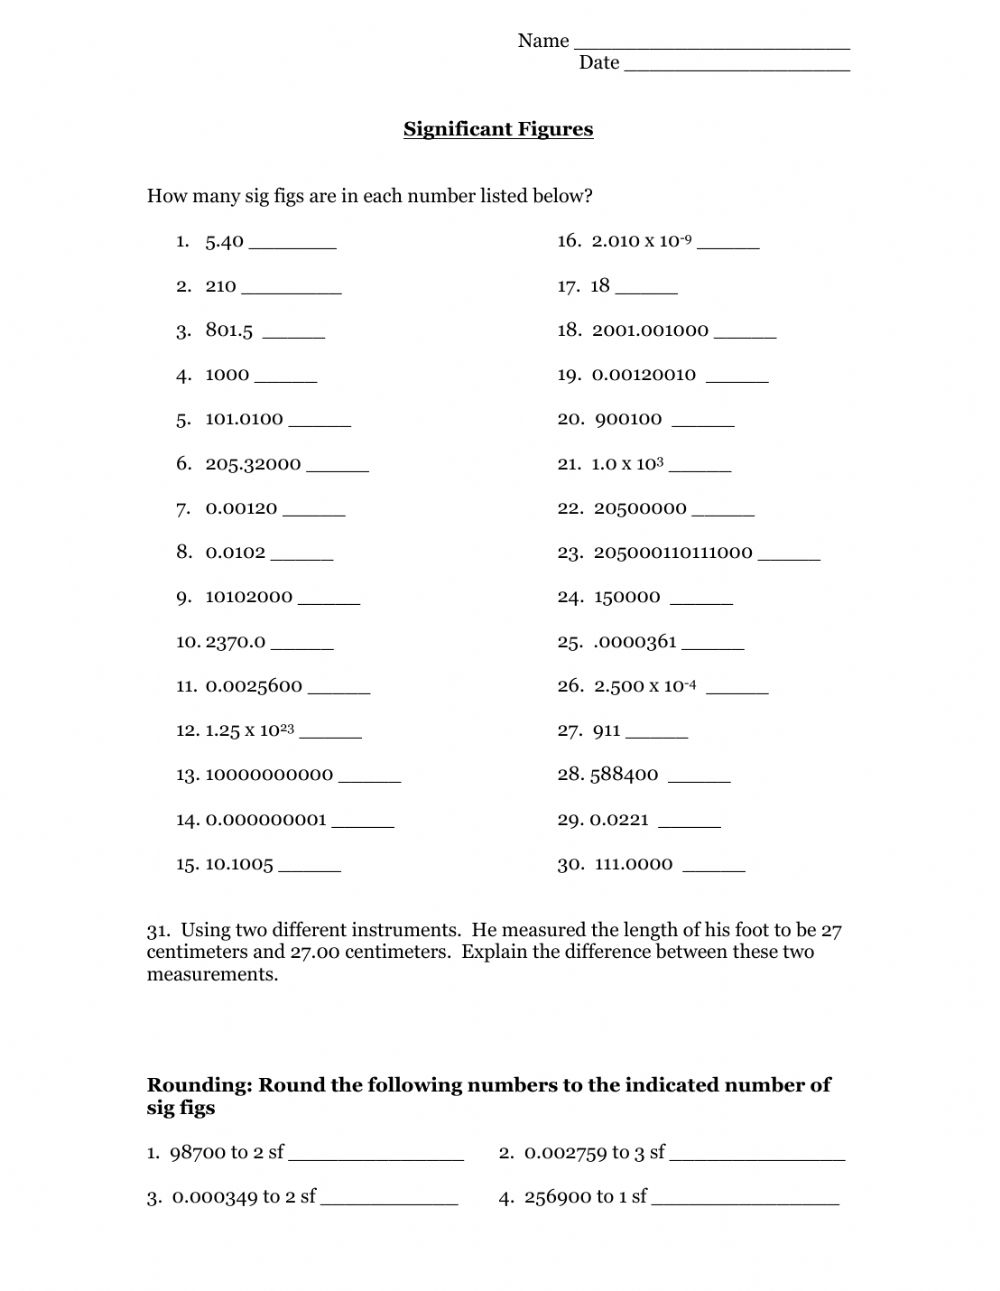 significant-figures-with-math-review-worksheet-math-worksheet-answers